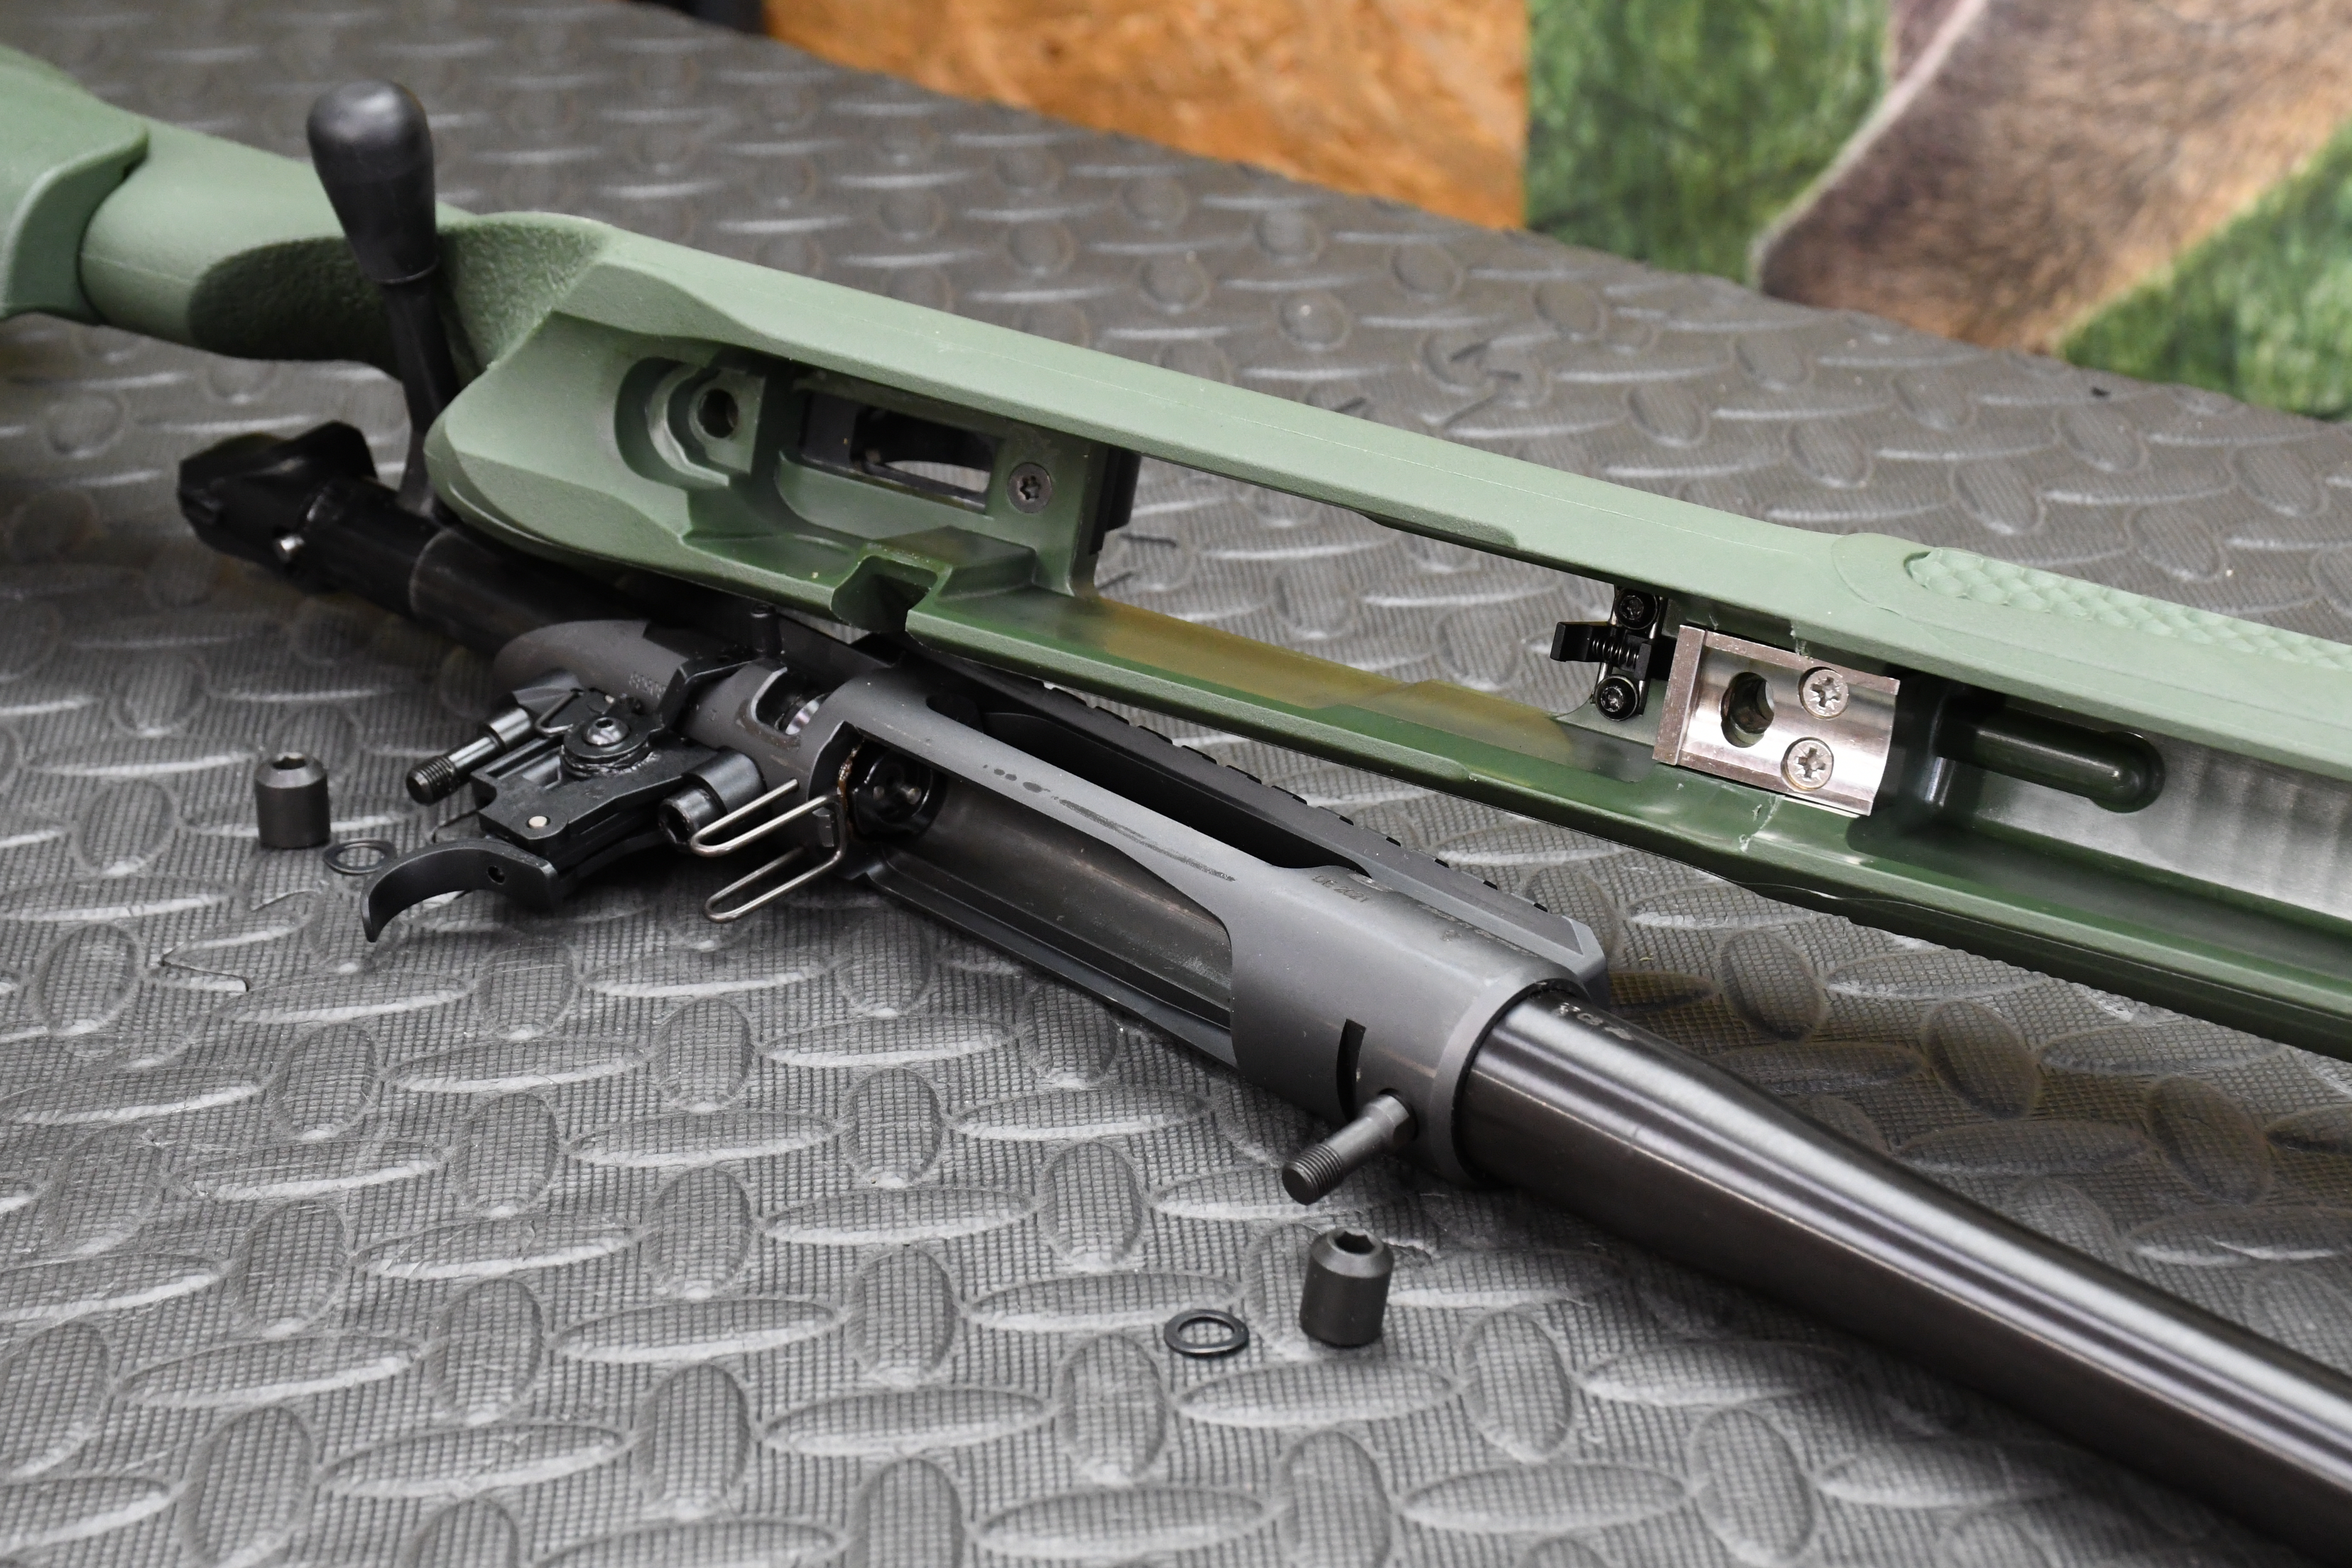 Mauser M18 Rifle Now Available in 2 Old-School Camo Patterns